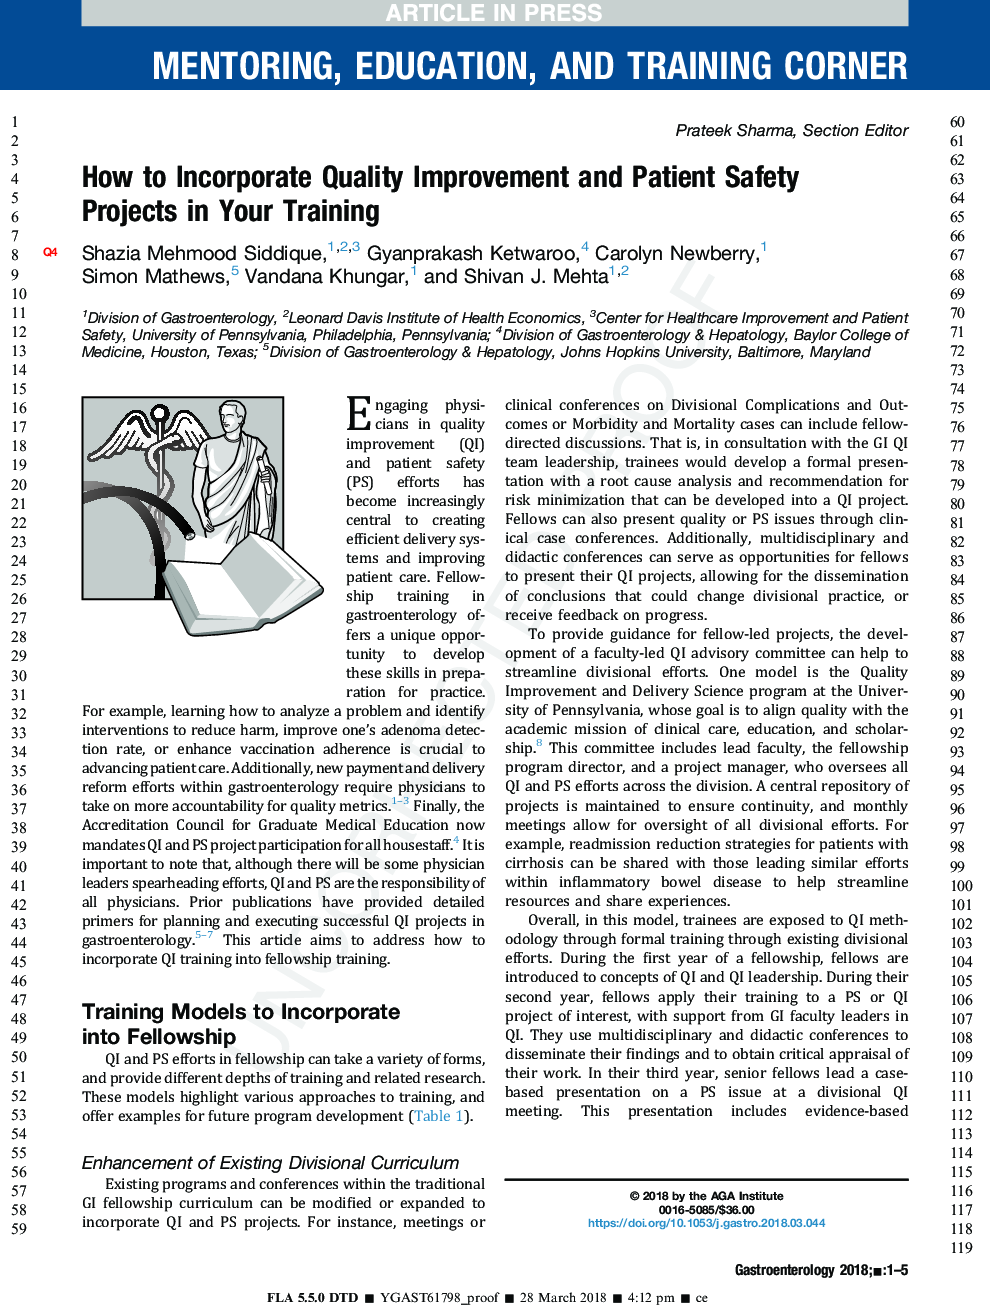 How to Incorporate Quality Improvement and Patient Safety Projects in Your Training